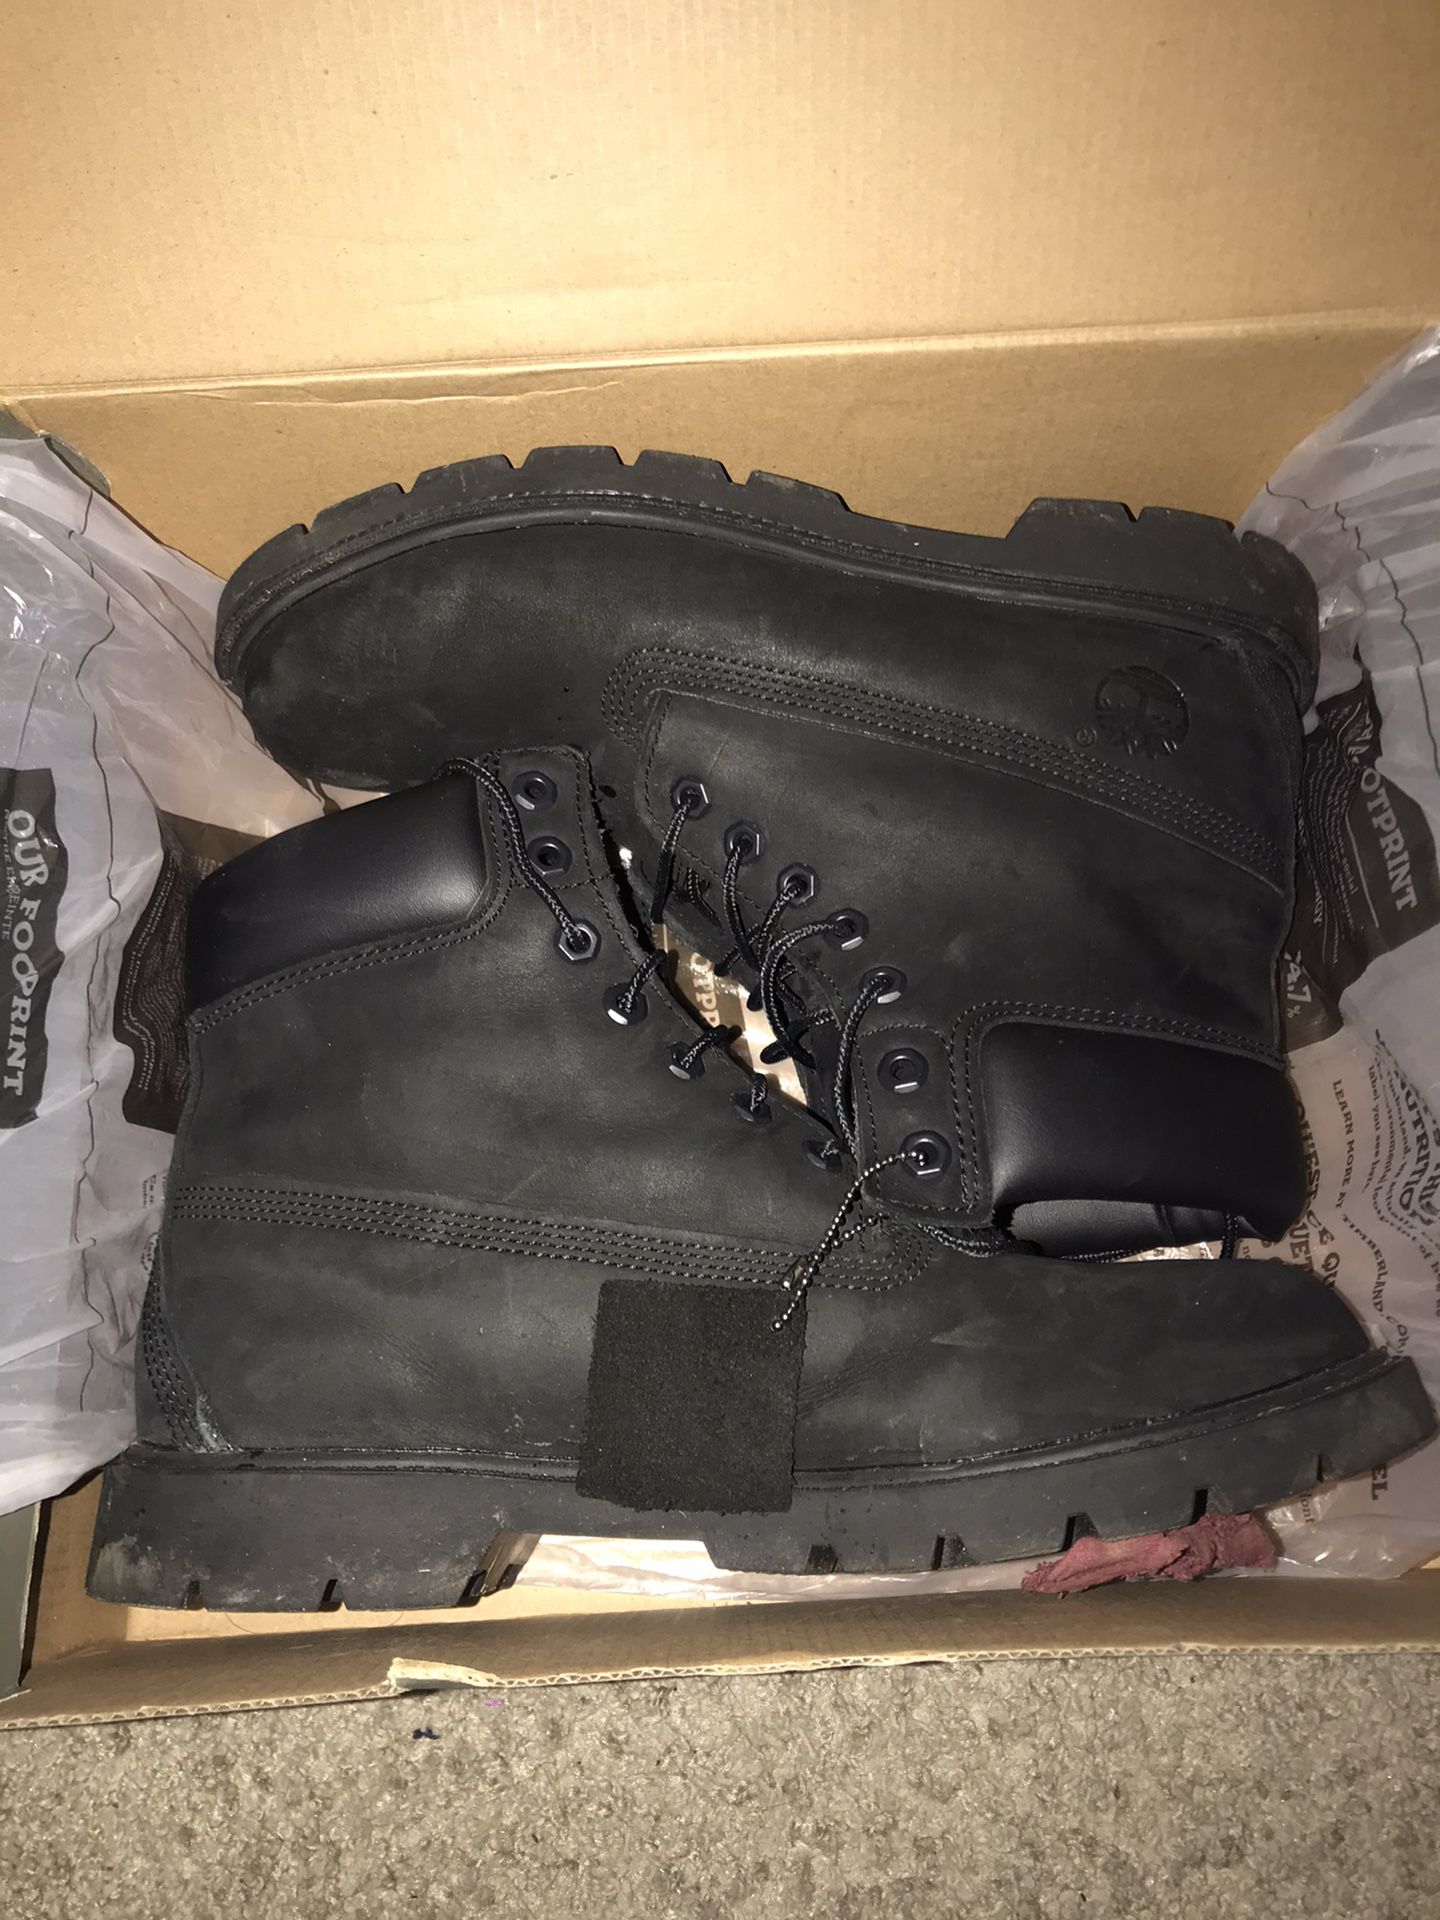 Timberland pro work boots size (9.5) so can fit size 10-11